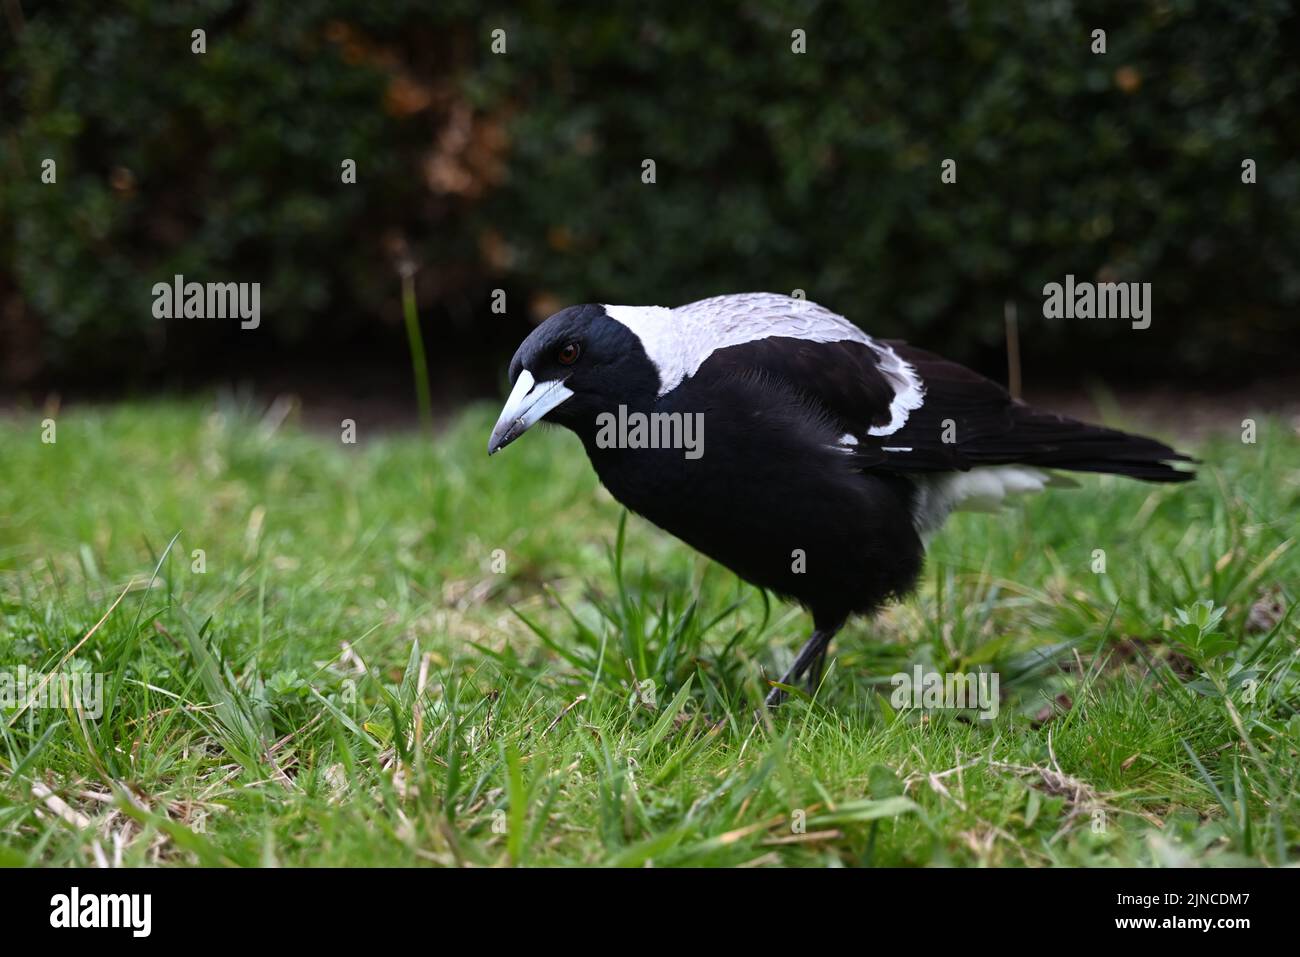 Female Australian magpie, with dirt and debris on its beak, standing on a lawn in a suburban garden as it looks for food Stock Photo